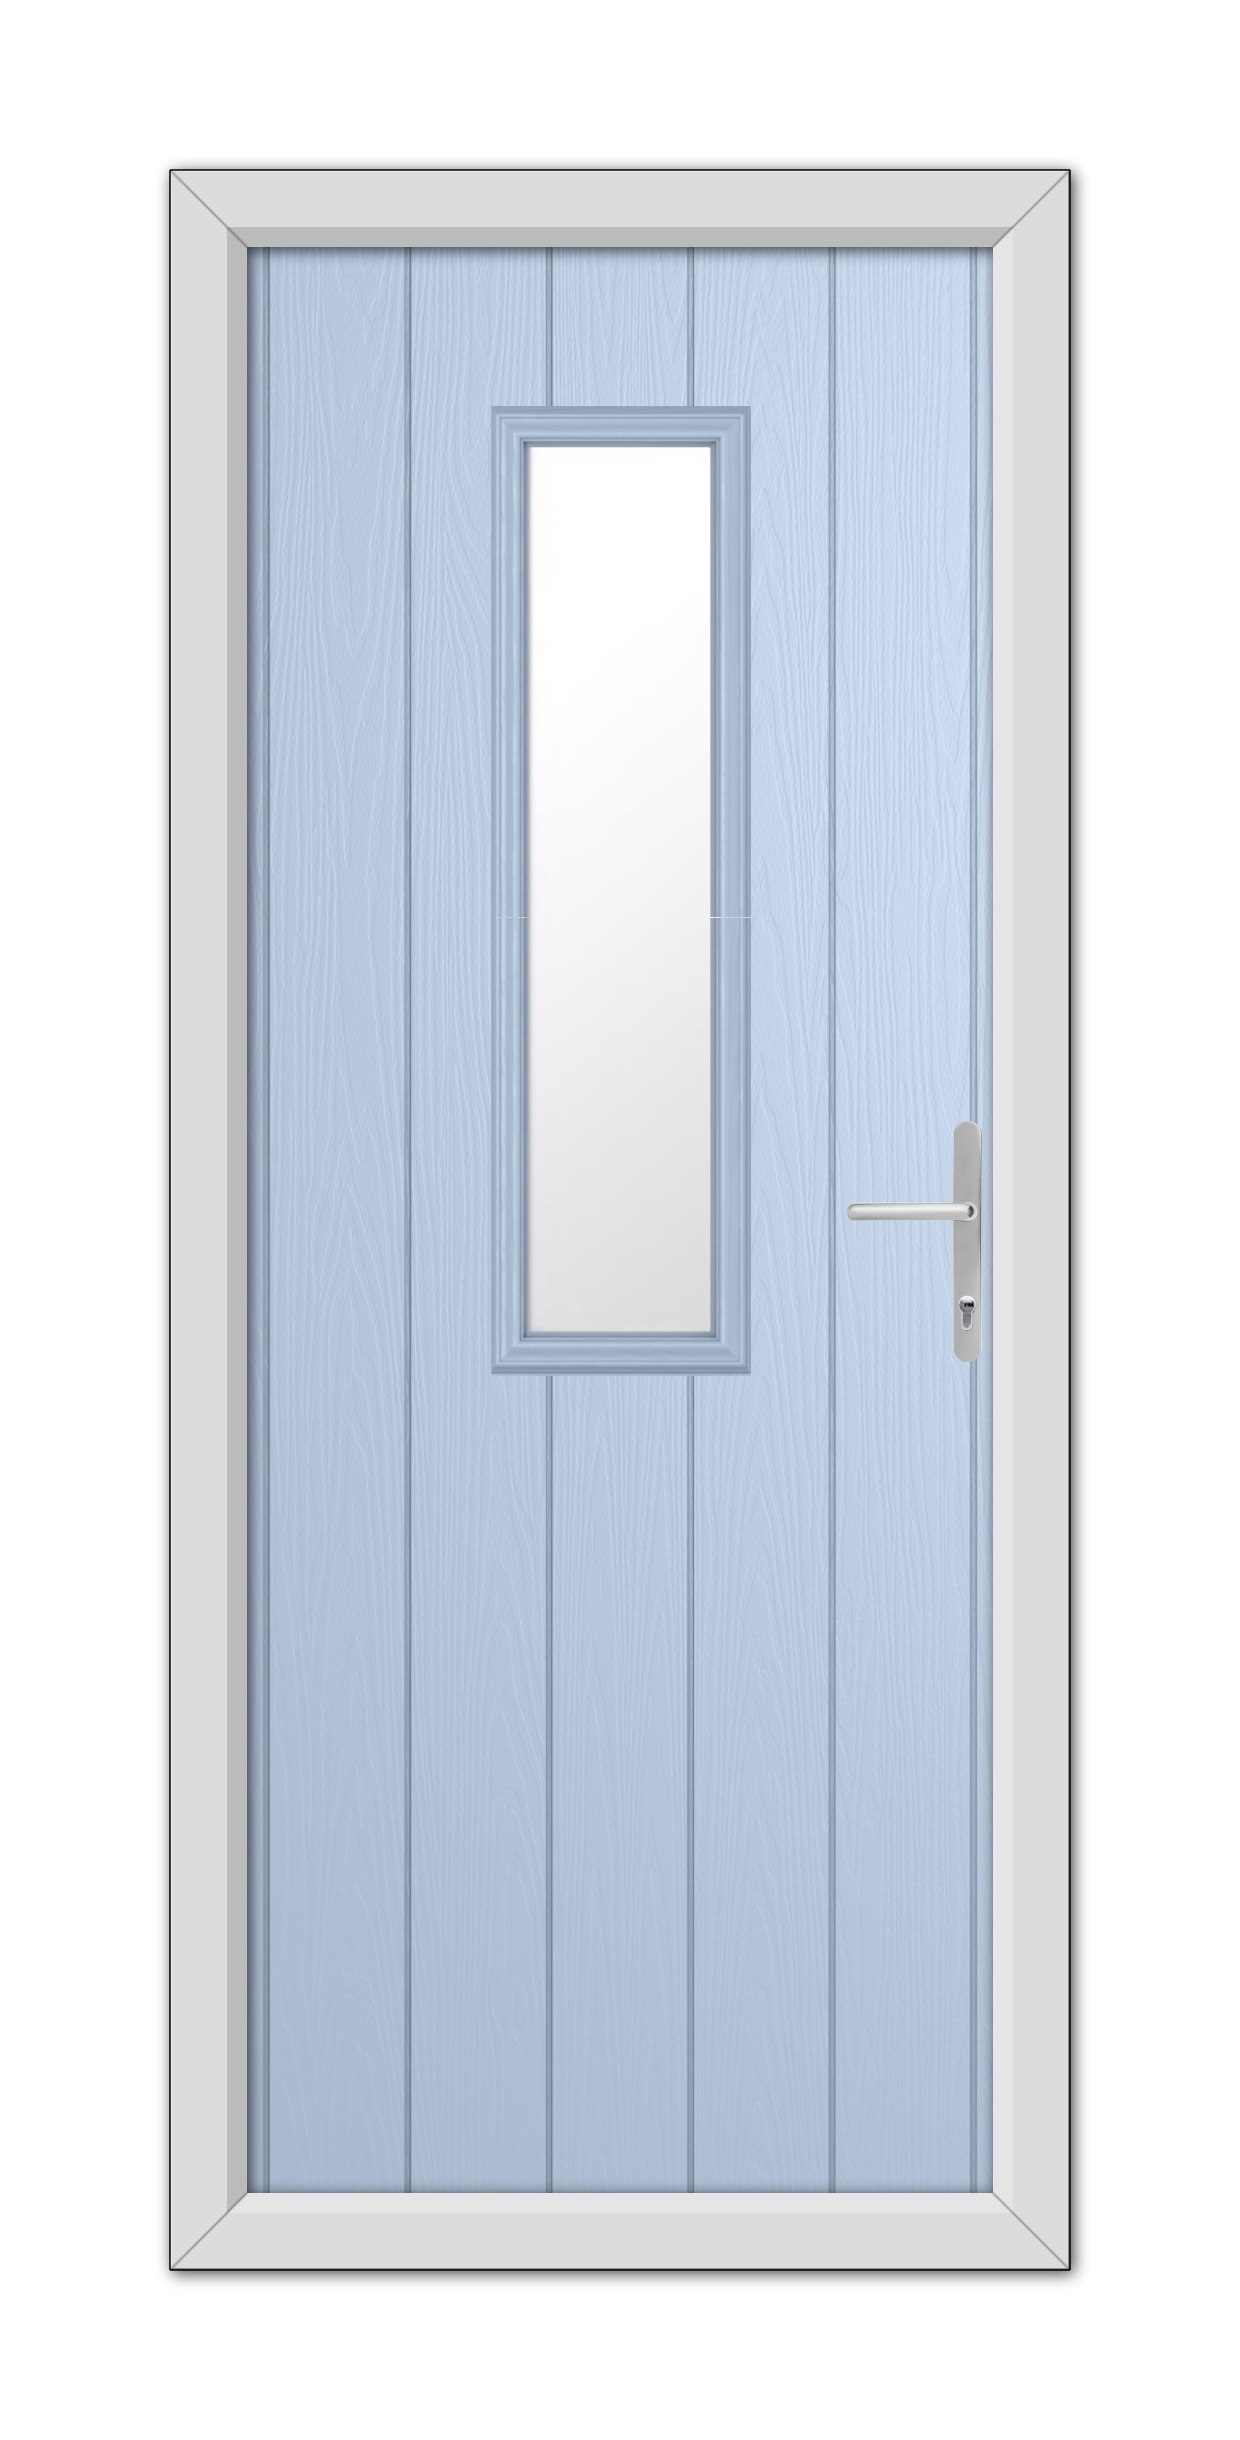 A Duck Egg Blue Mowbray Composite Door 48mm Timber Core with a vertical rectangular window and a silver handle, set within a white door frame.